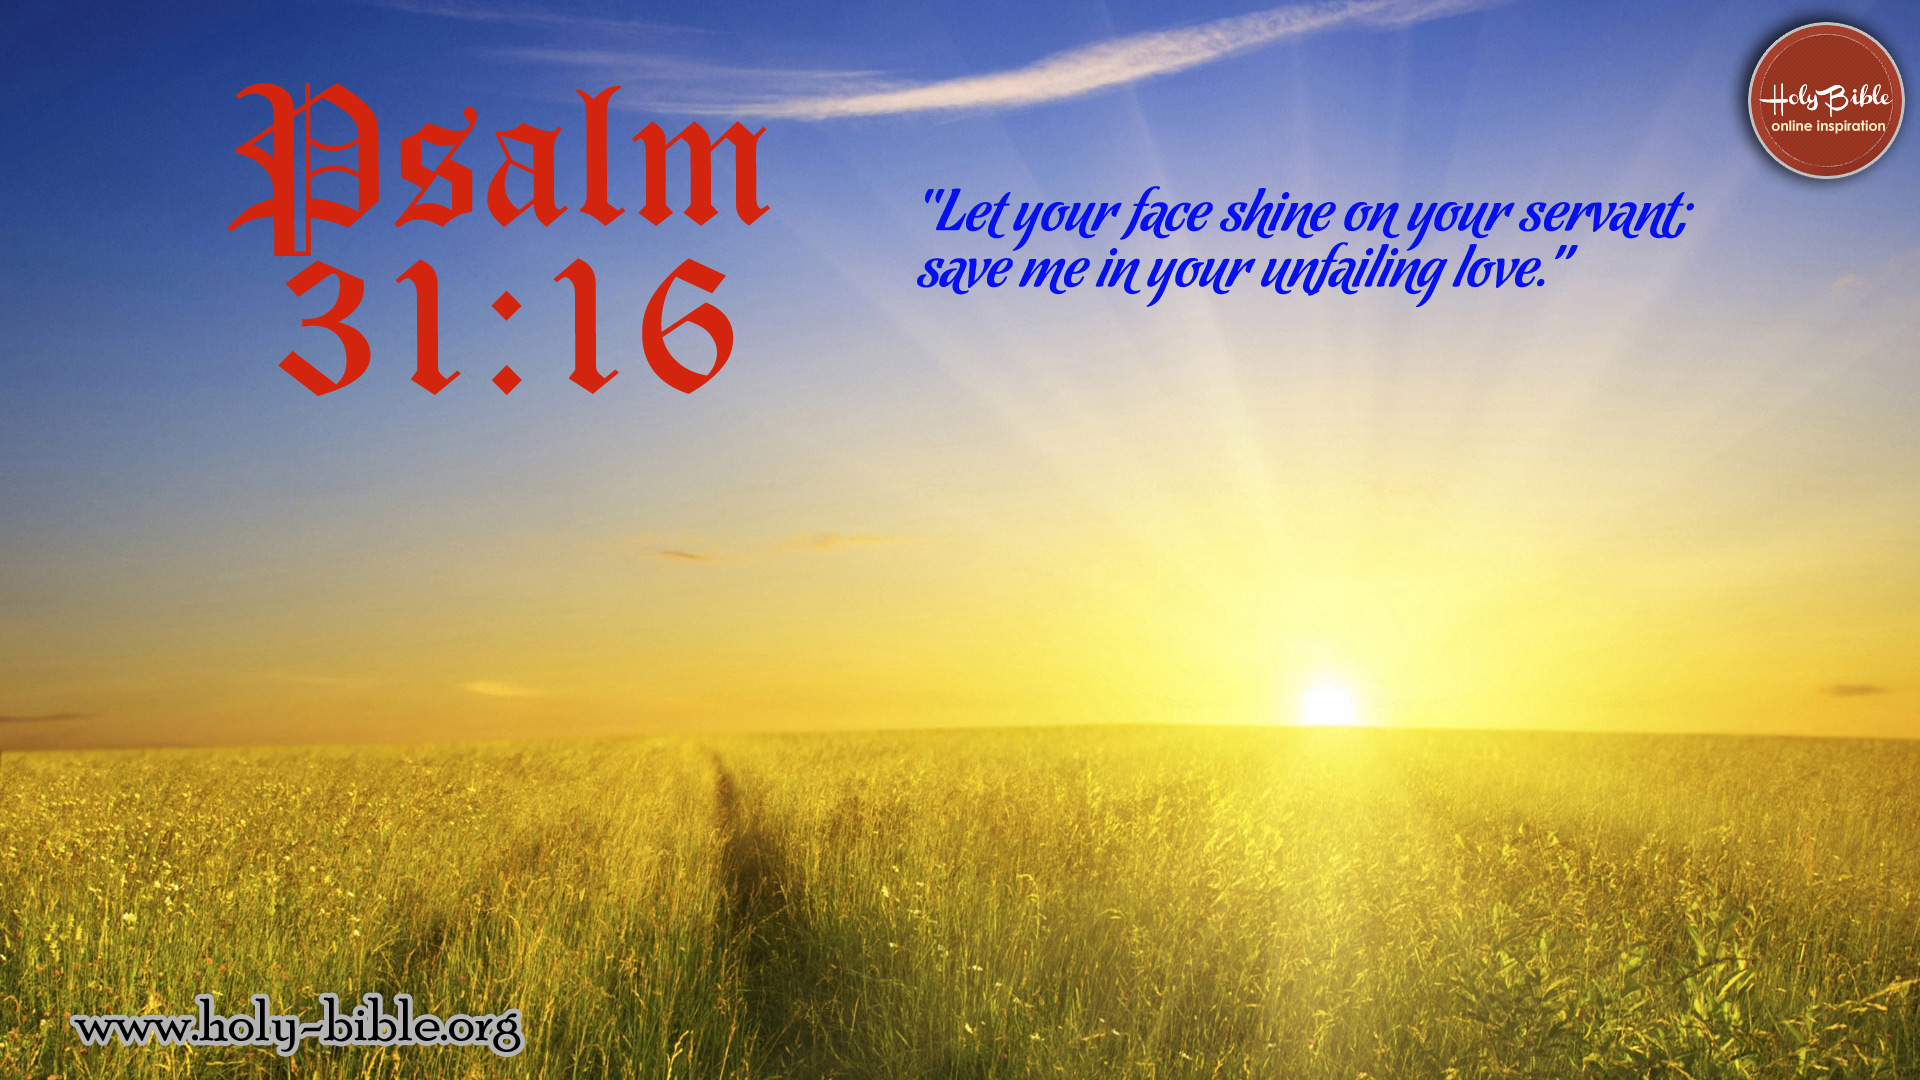 Bible Verse of the day - Psalm 31:16